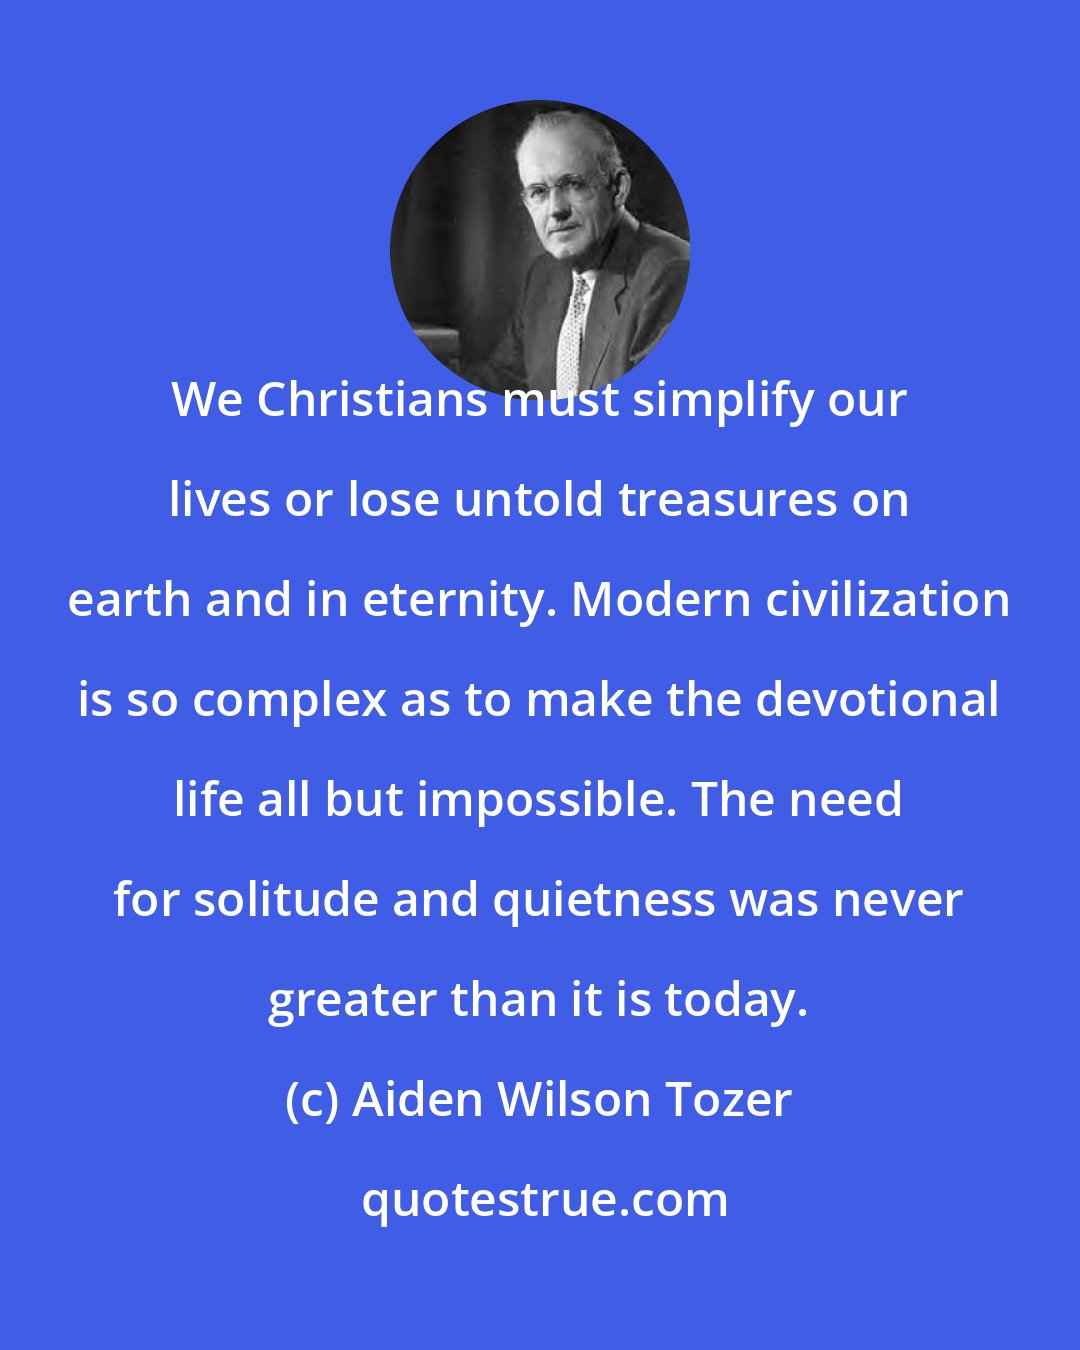 Aiden Wilson Tozer: We Christians must simplify our lives or lose untold treasures on earth and in eternity. Modern civilization is so complex as to make the devotional life all but impossible. The need for solitude and quietness was never greater than it is today.